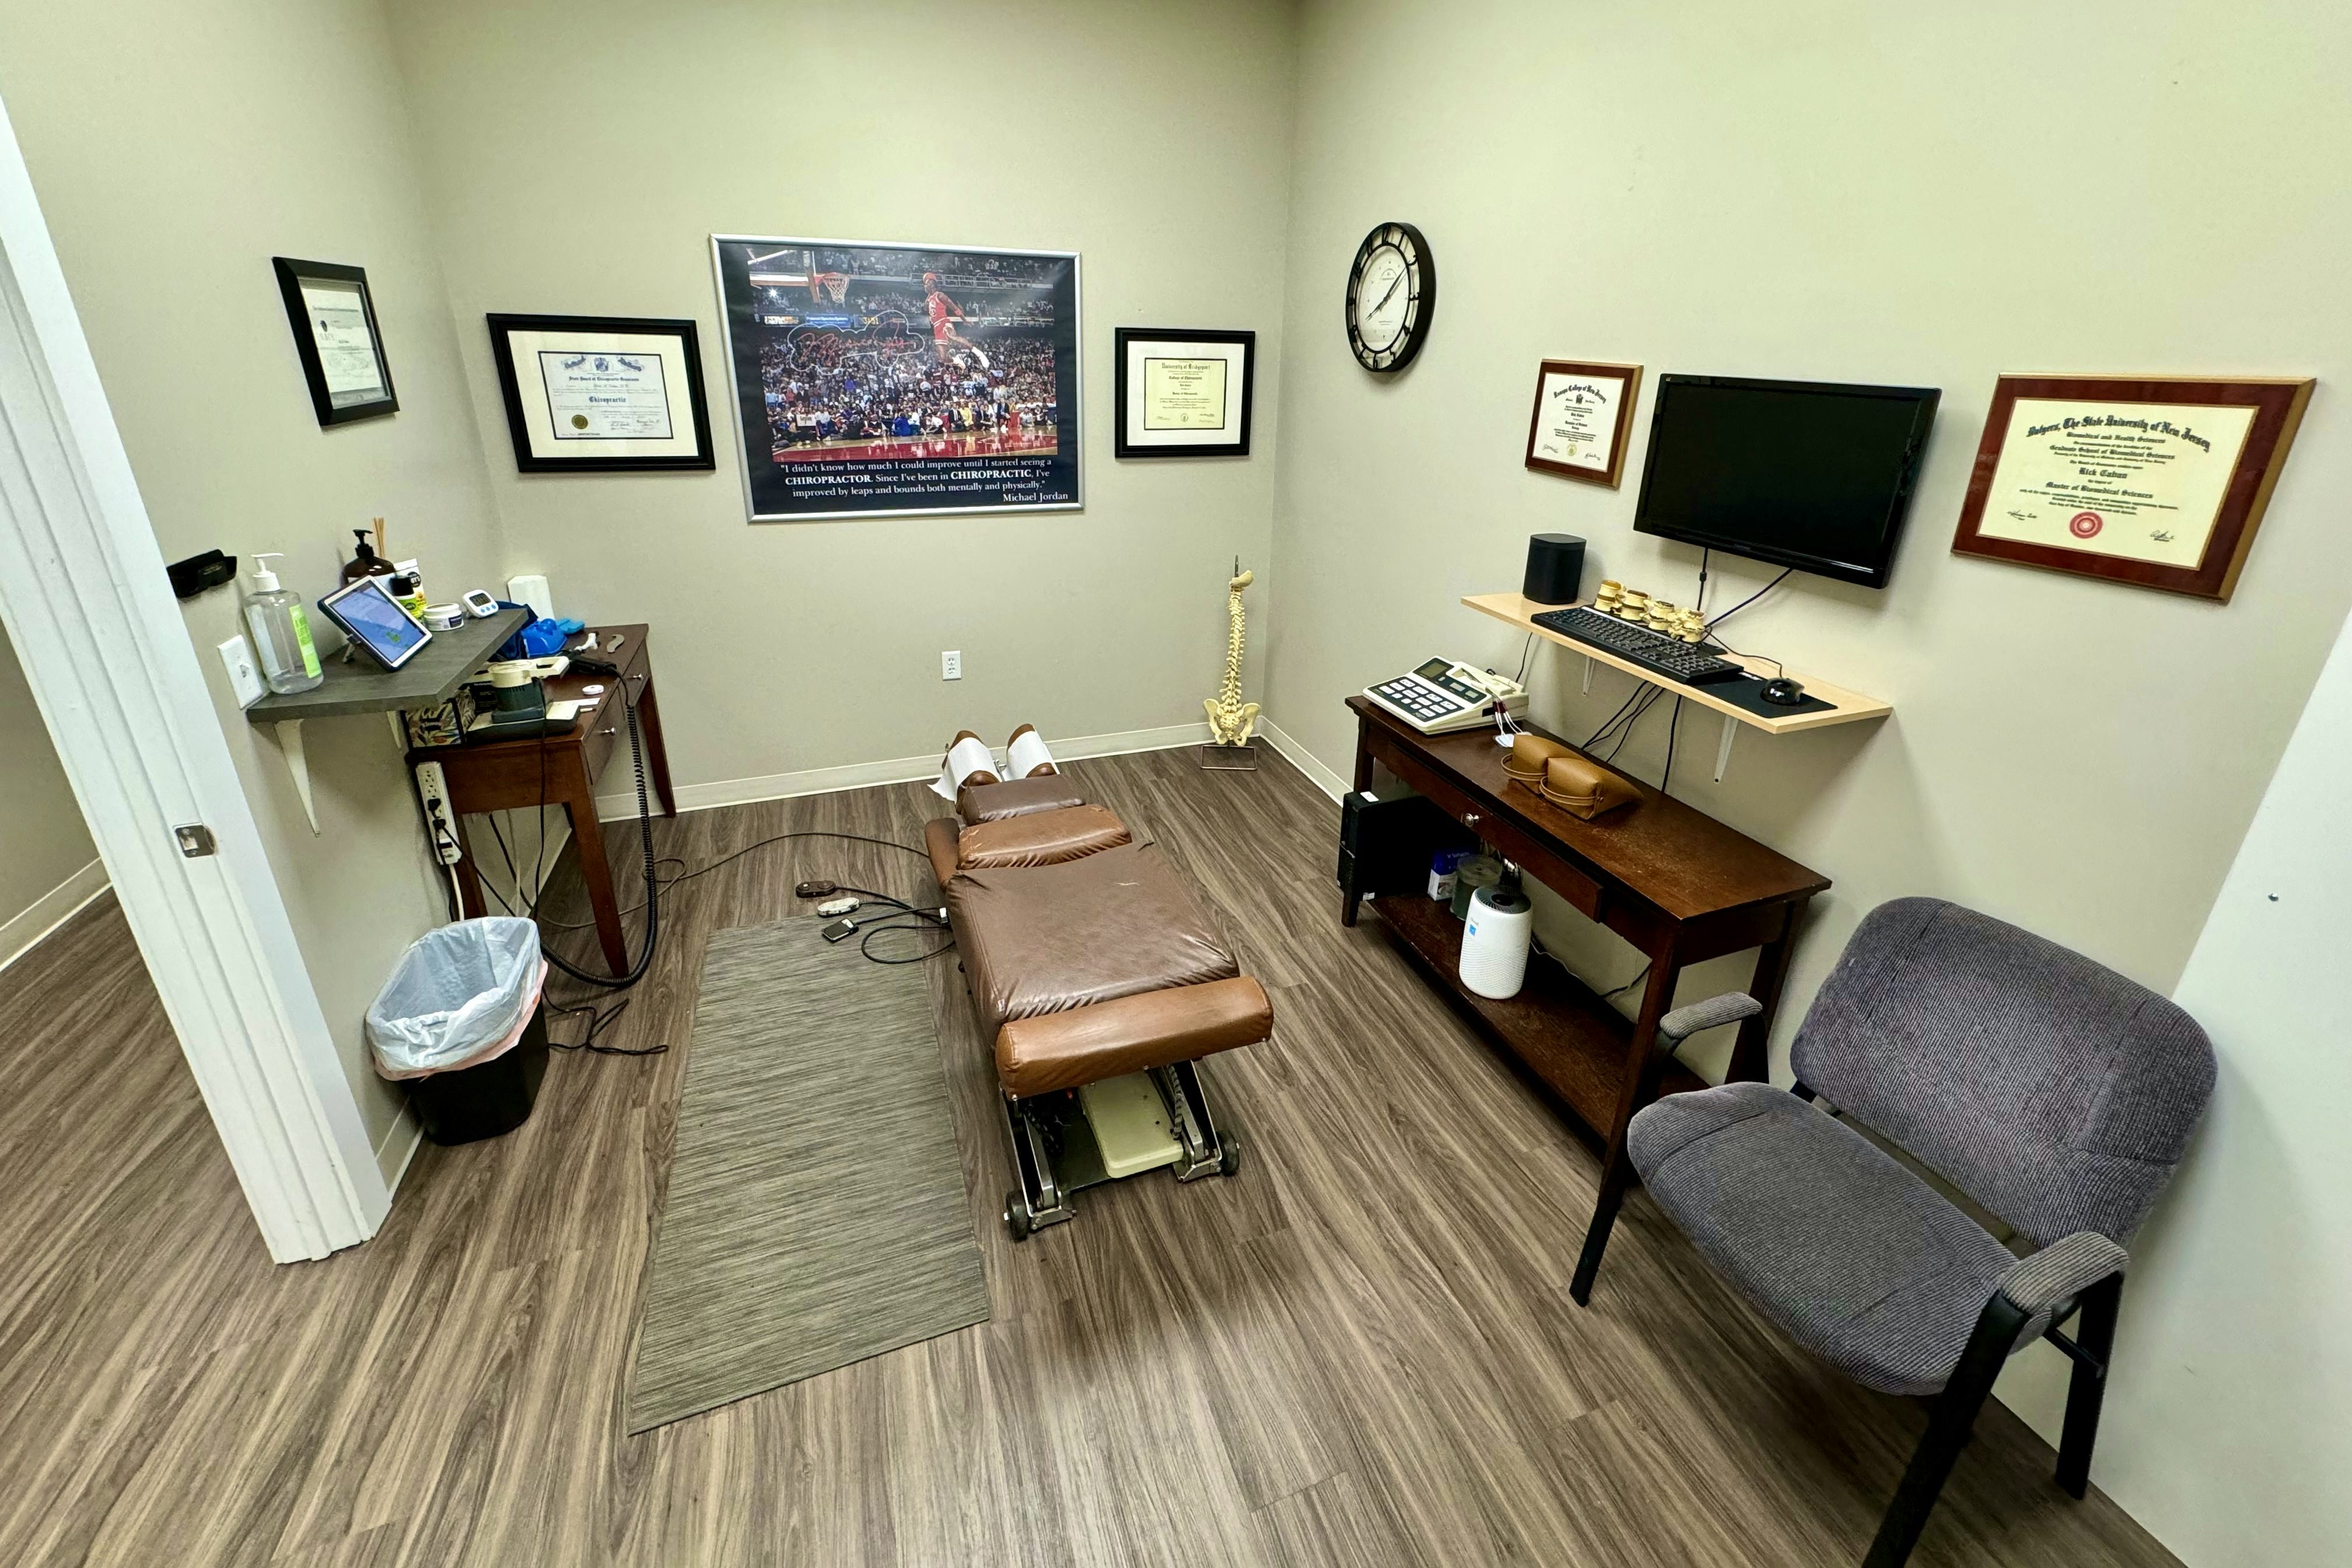 chiropractic treatment room of Sadon Chiropractic and Rehabilitation Center